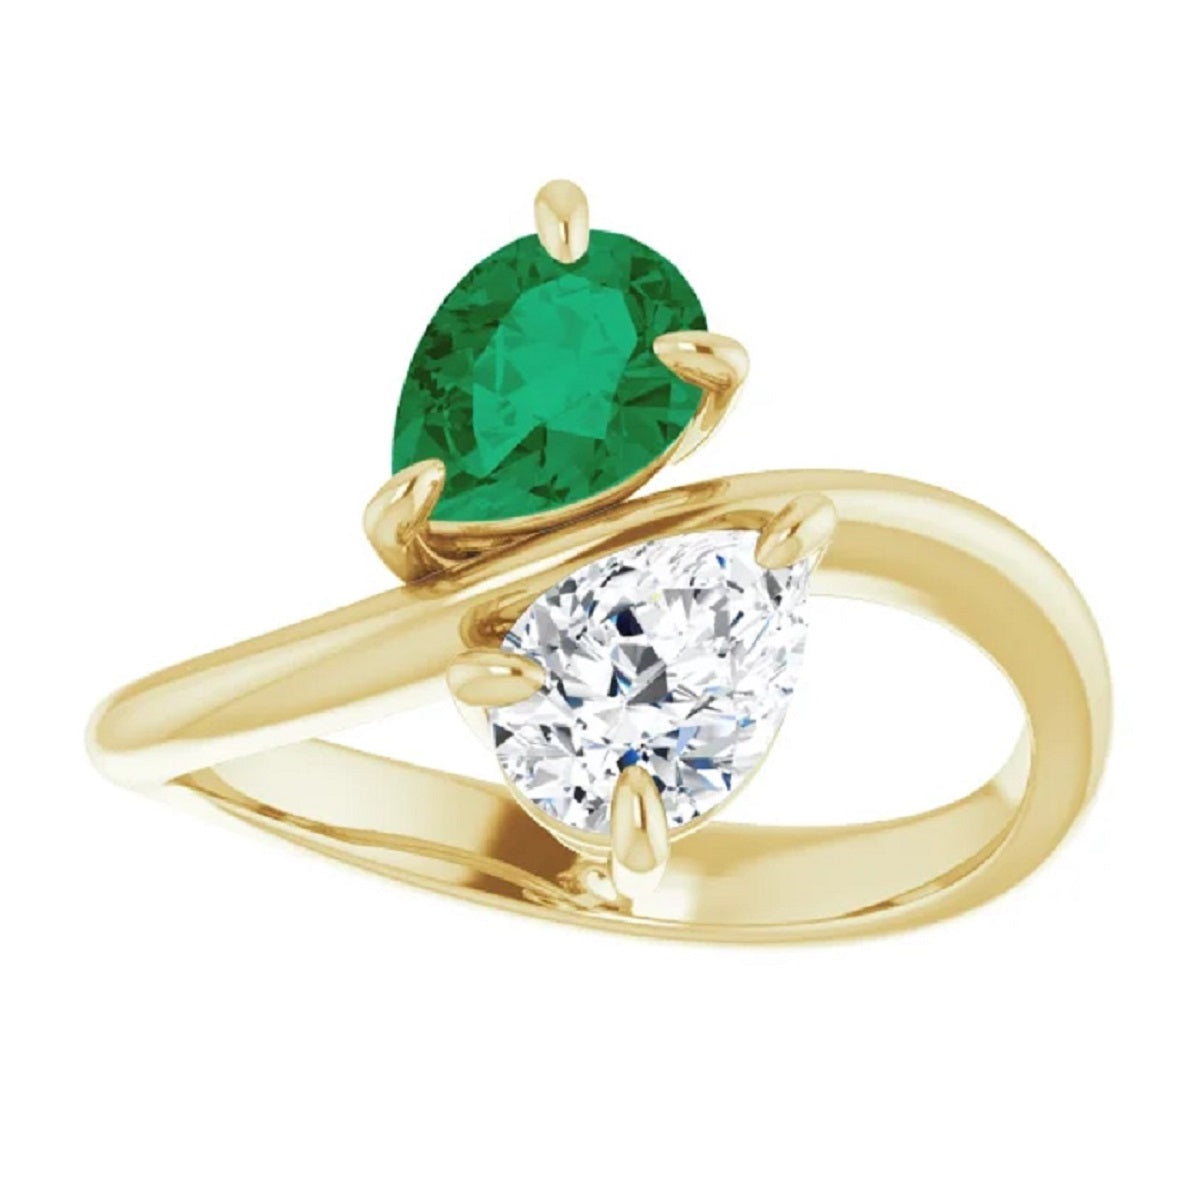 Toi et Moi Ring, Pear Engagement Ring, Double Stone Emerald Ring